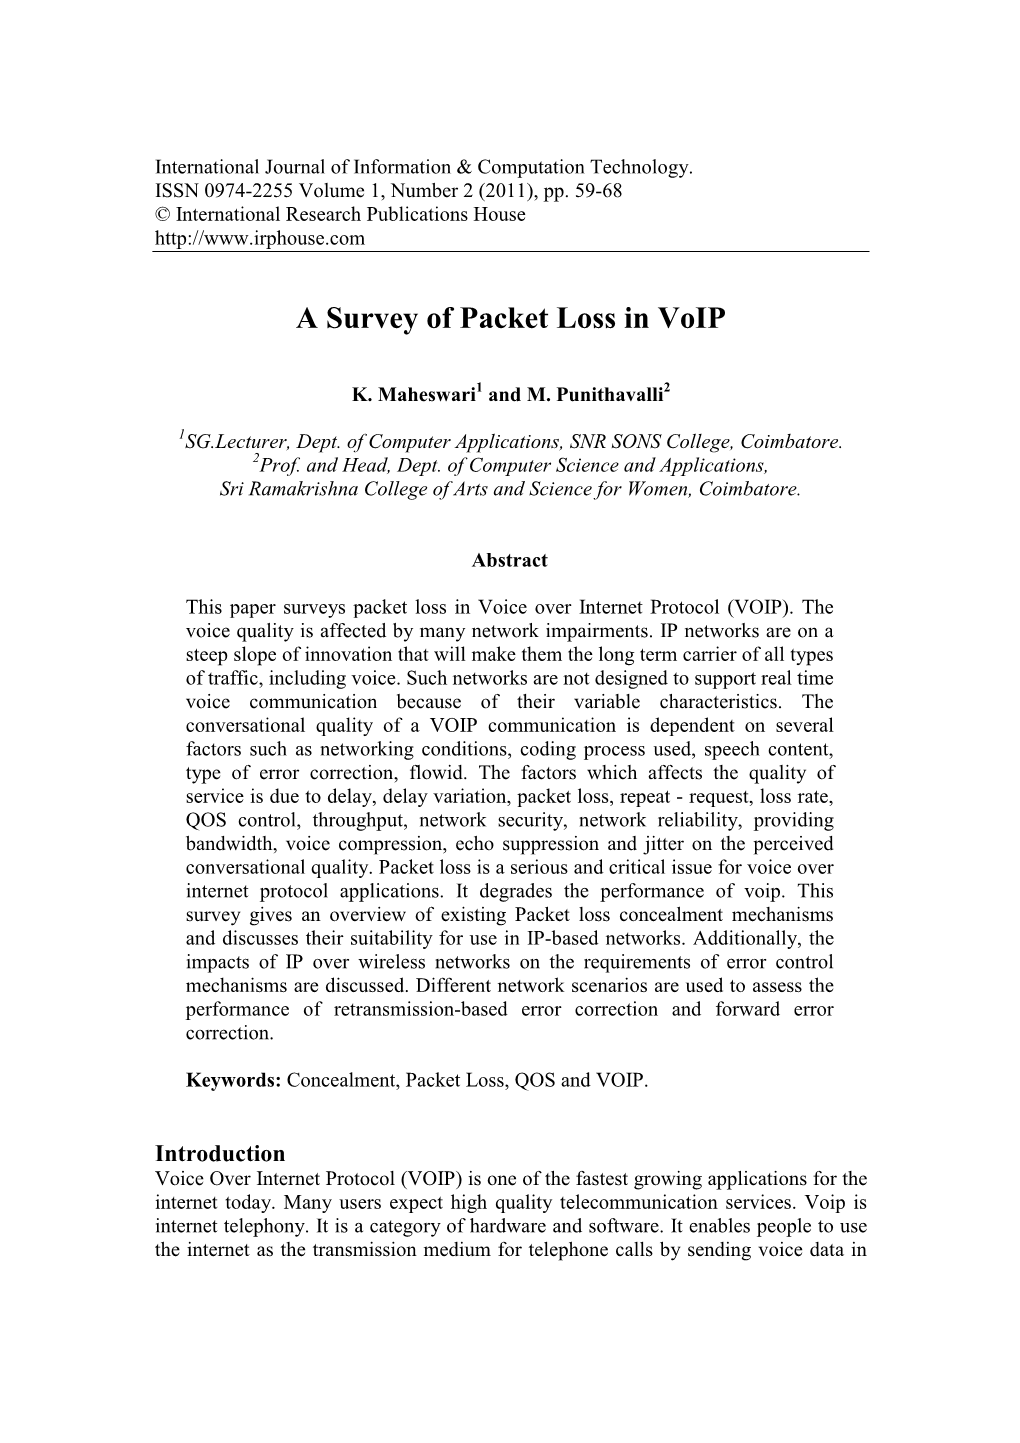 A Survey of Packet Loss in Voip